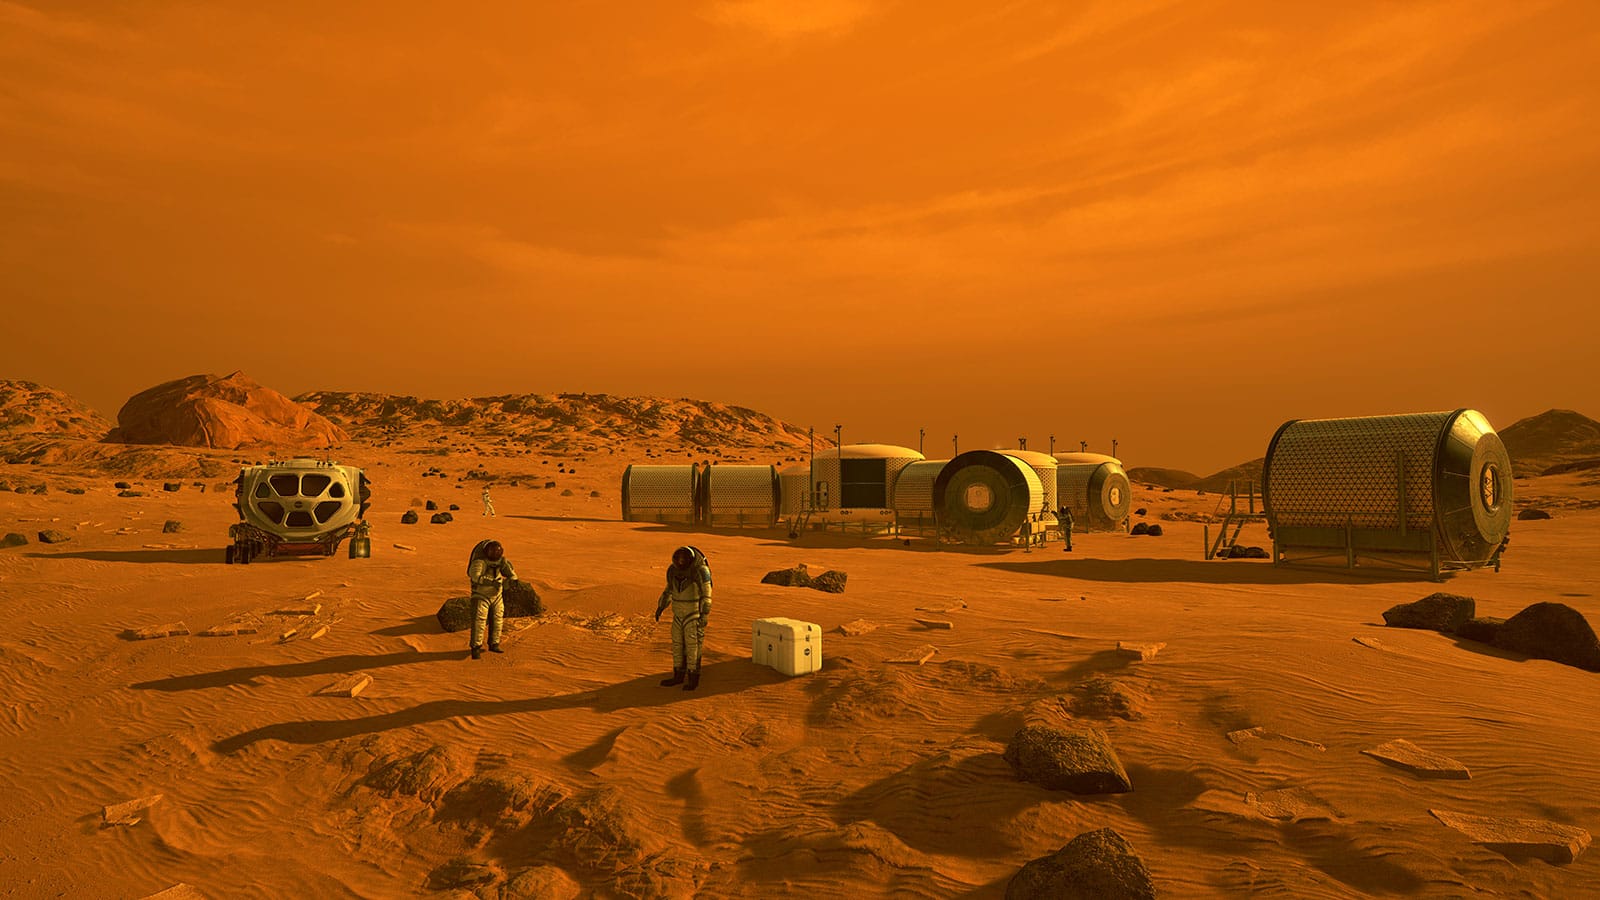 Can we as Christians support the endeavour to colonise Mars?